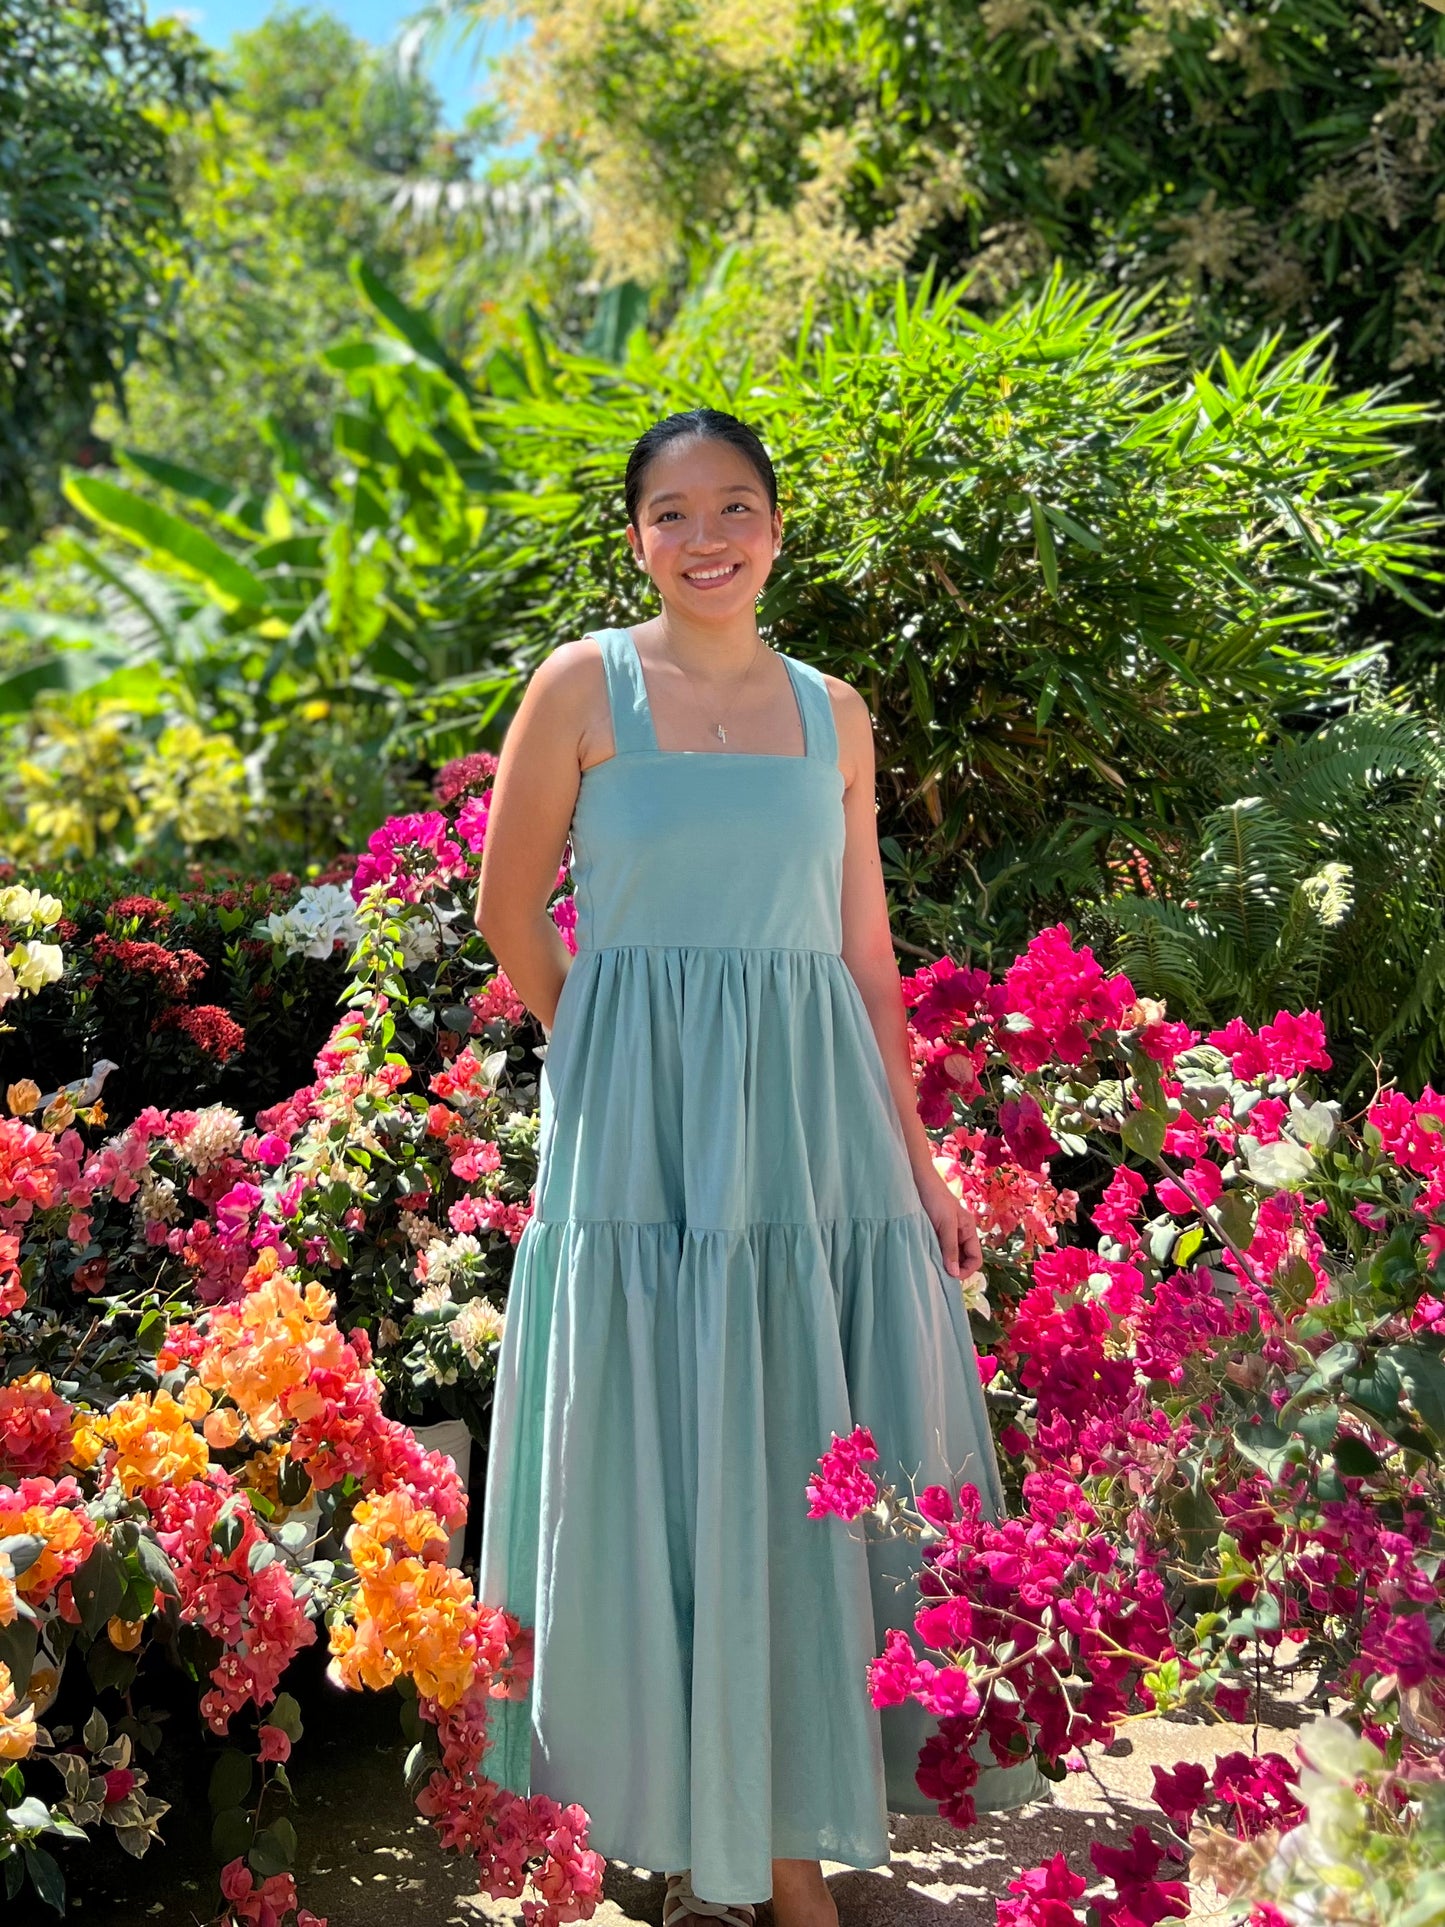 Psalm Dress in Teal